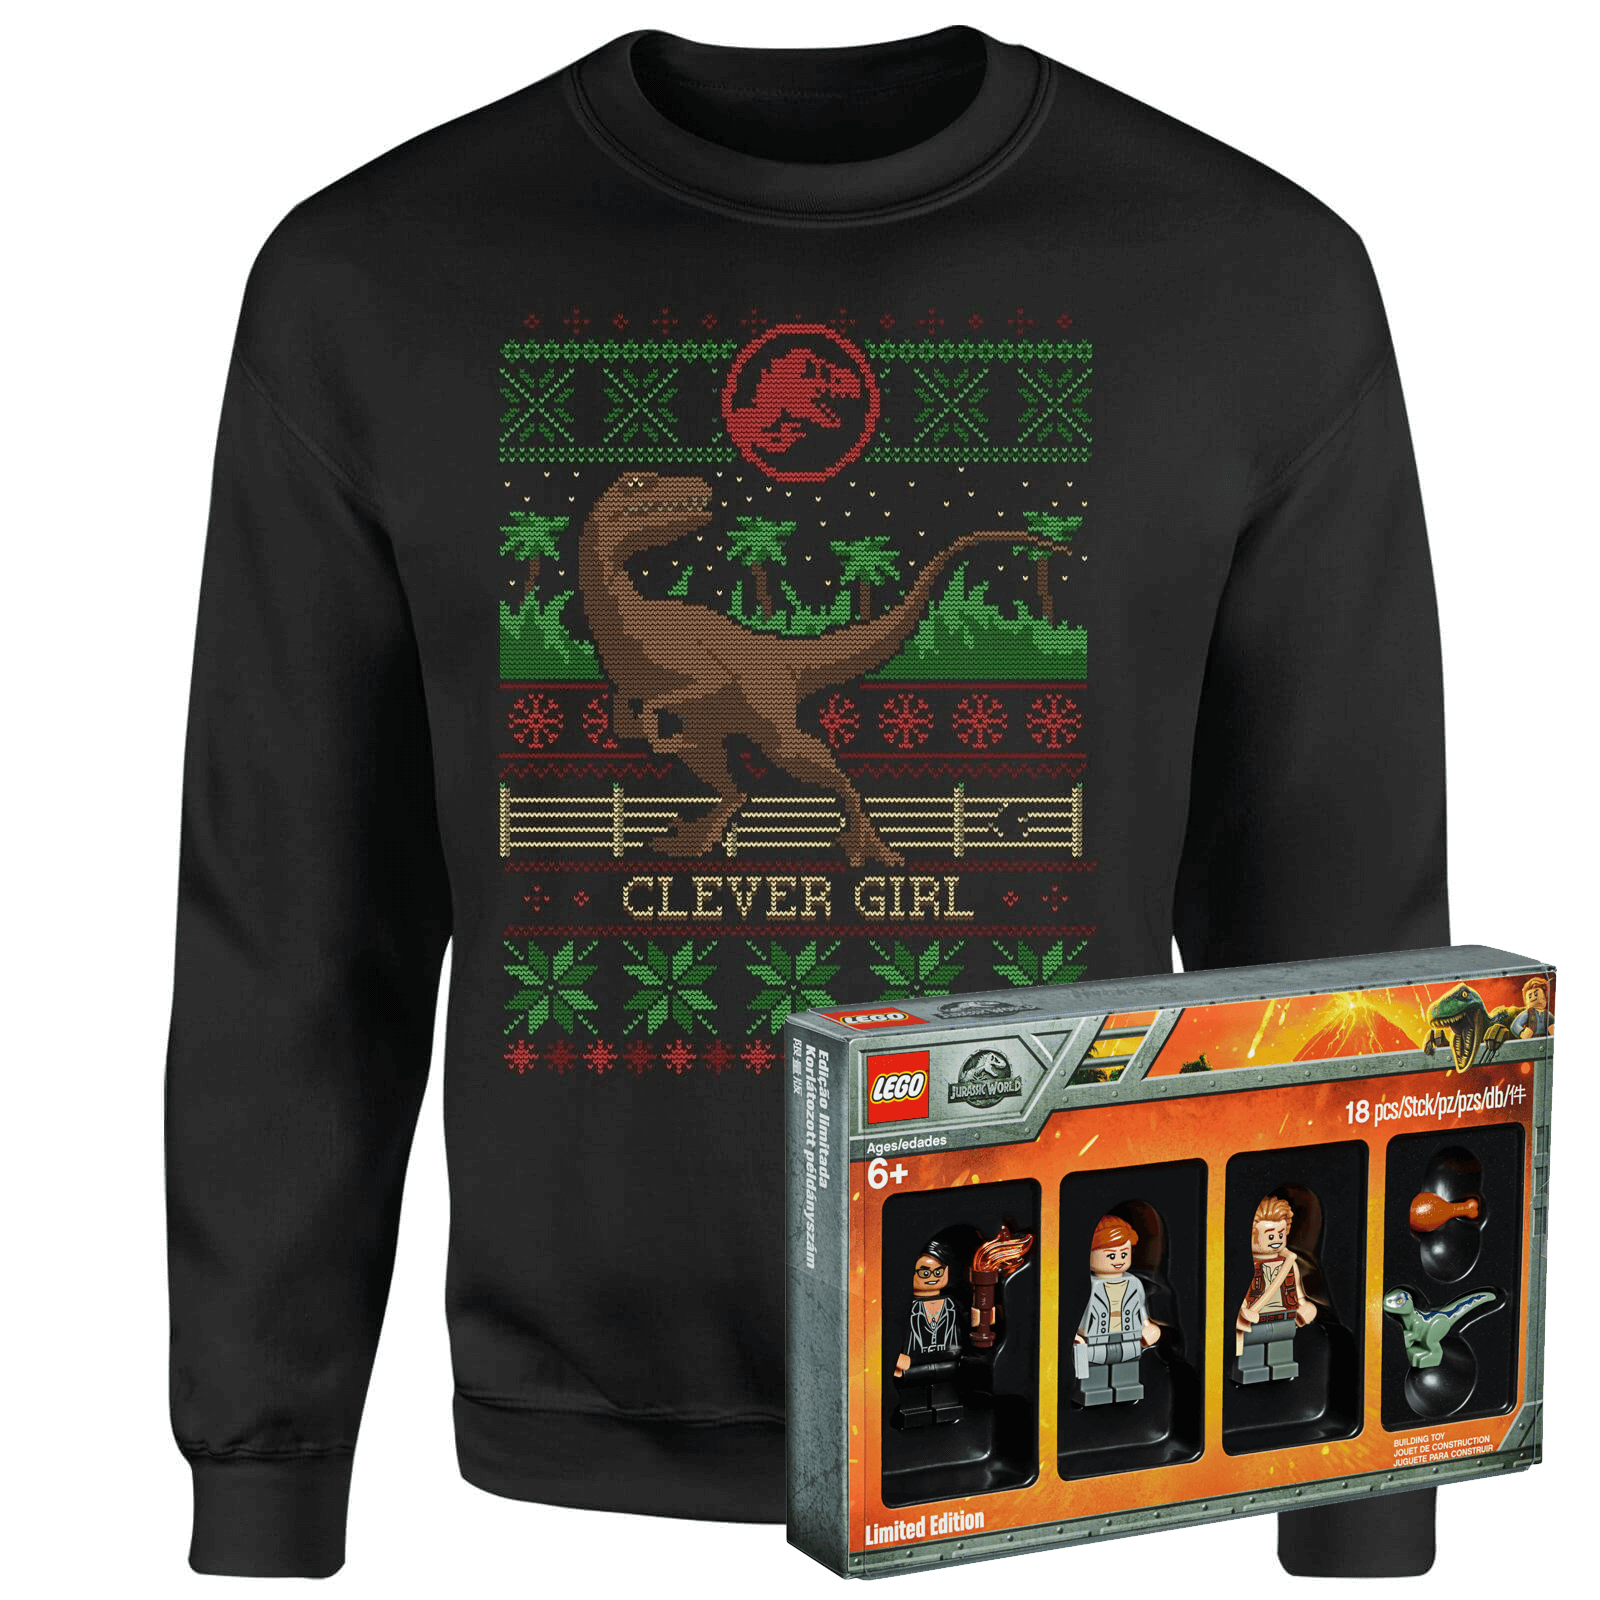 Jurassic Park Limited Edition Lego Minifigures and Christmas Sweater Bundle - Women's - 4XL - Black